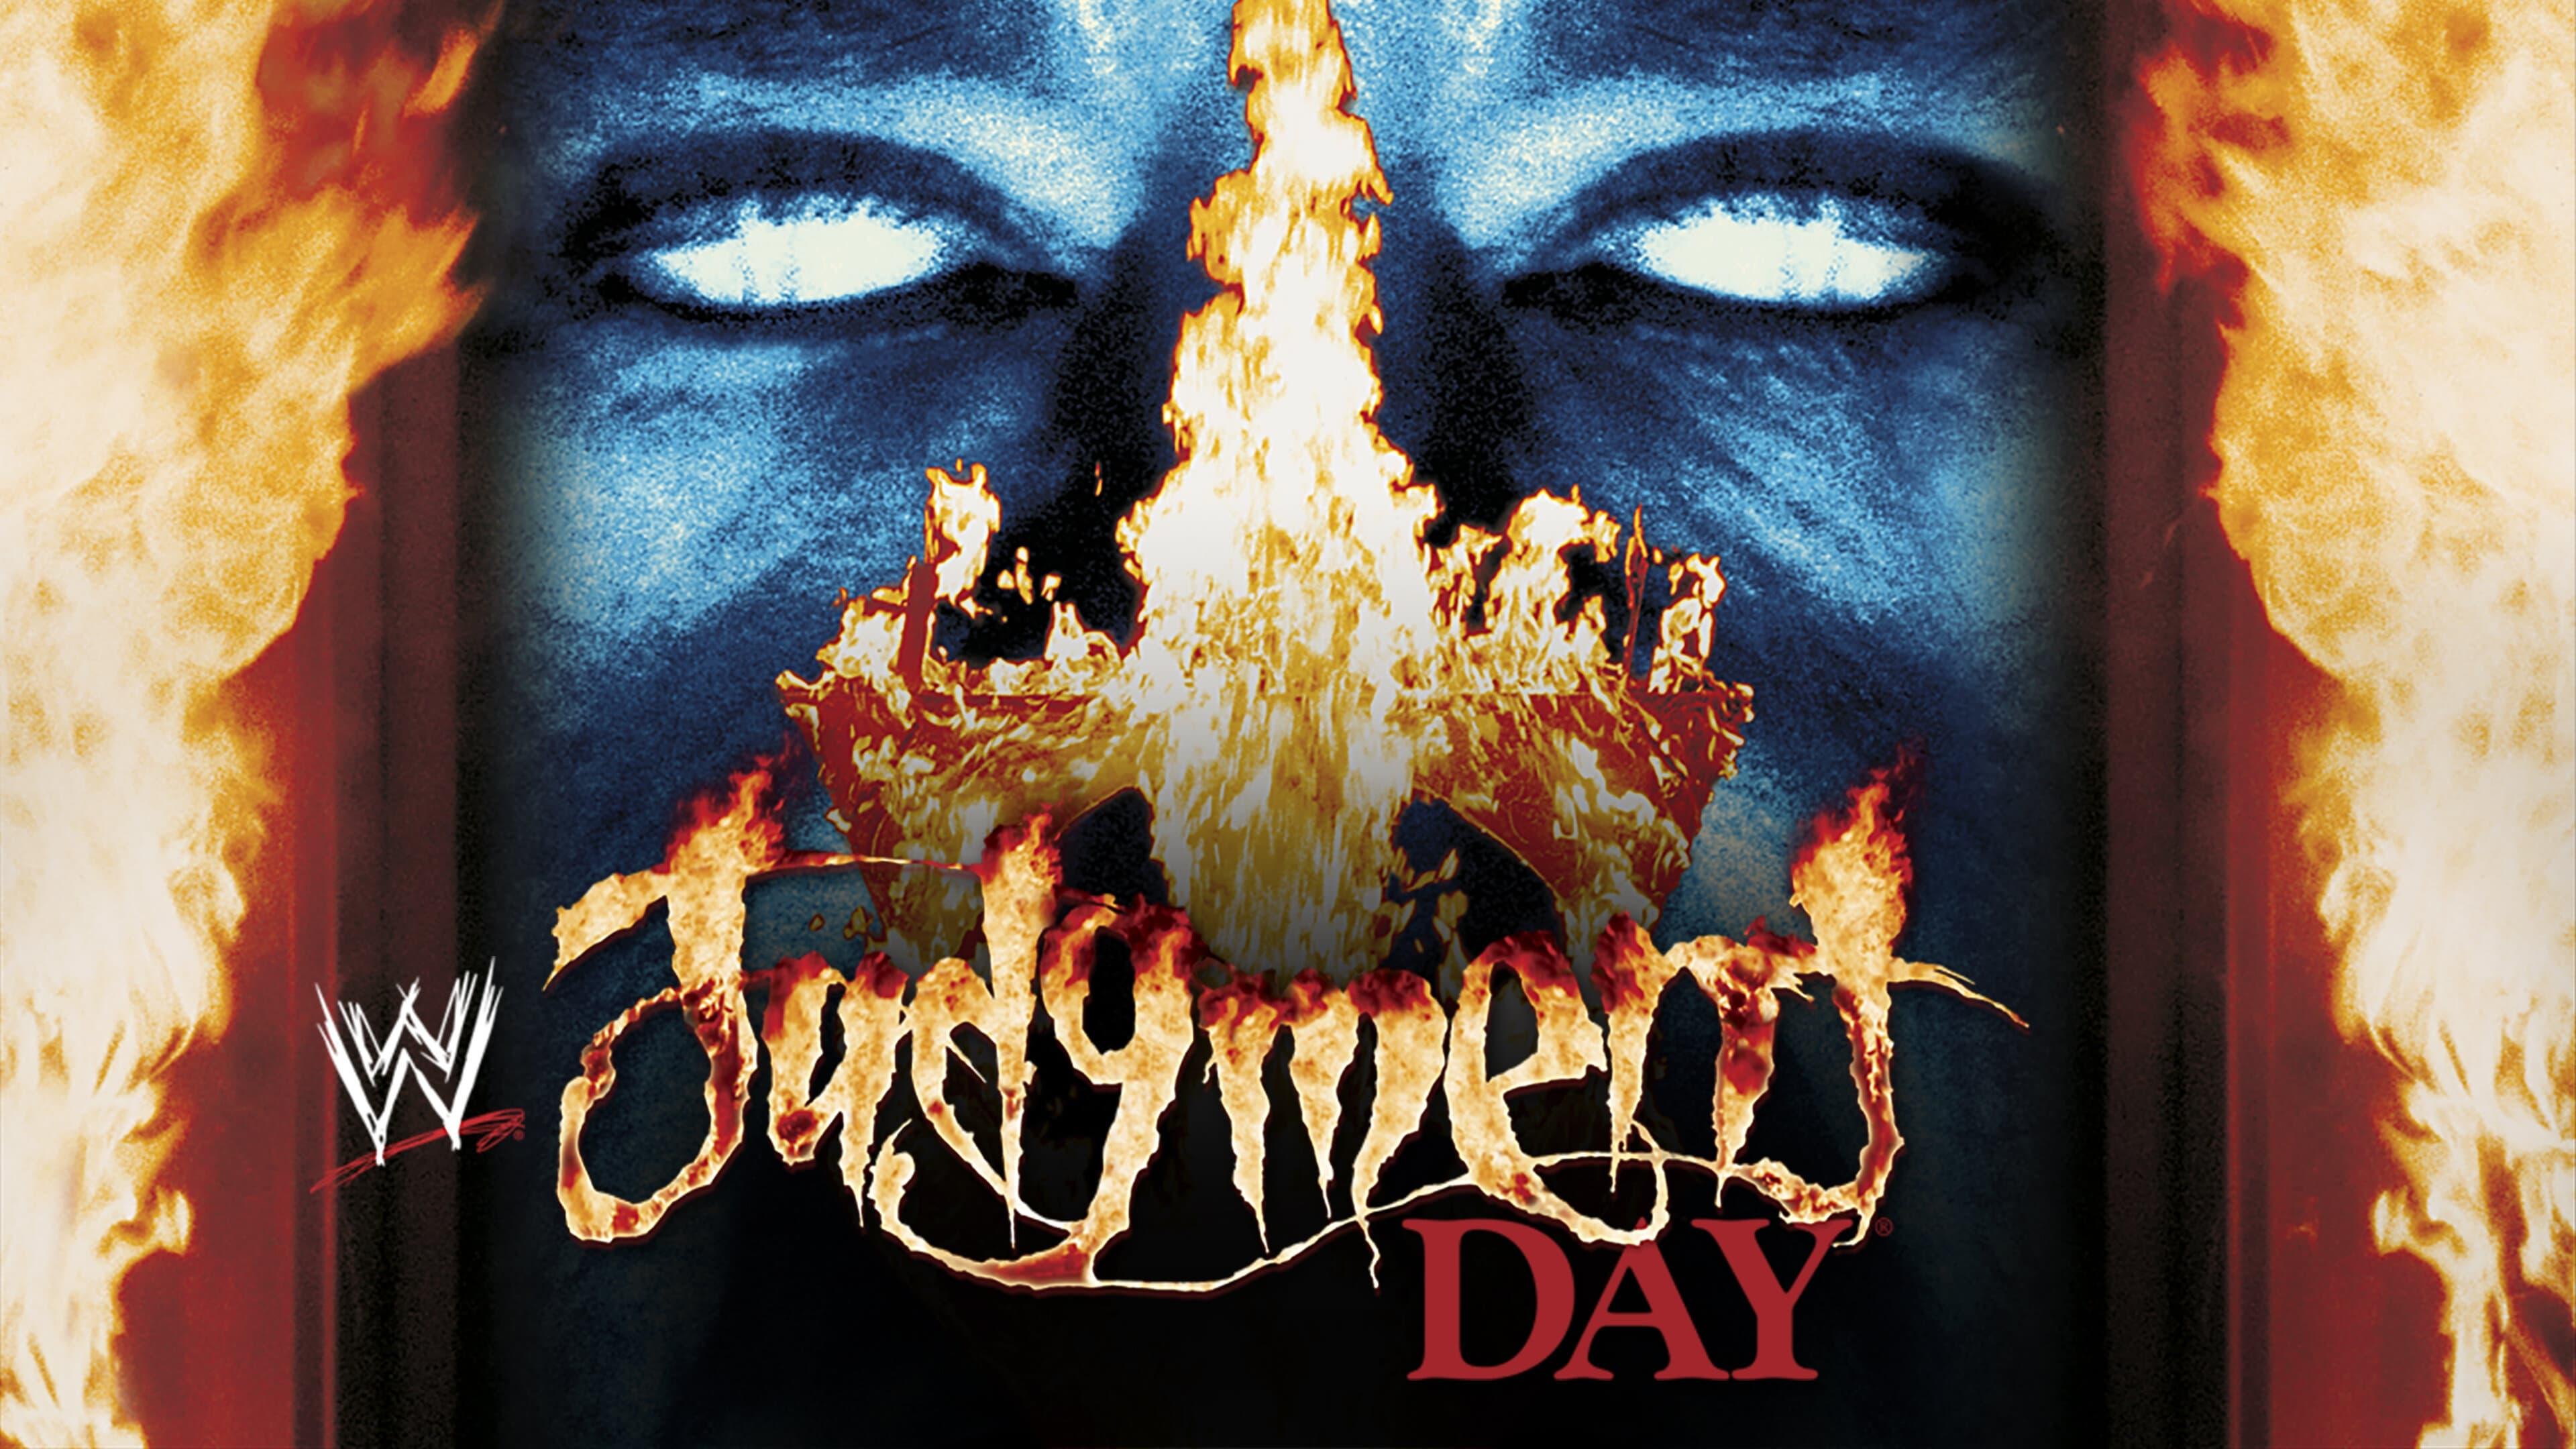 WWE Judgment Day 2004 backdrop